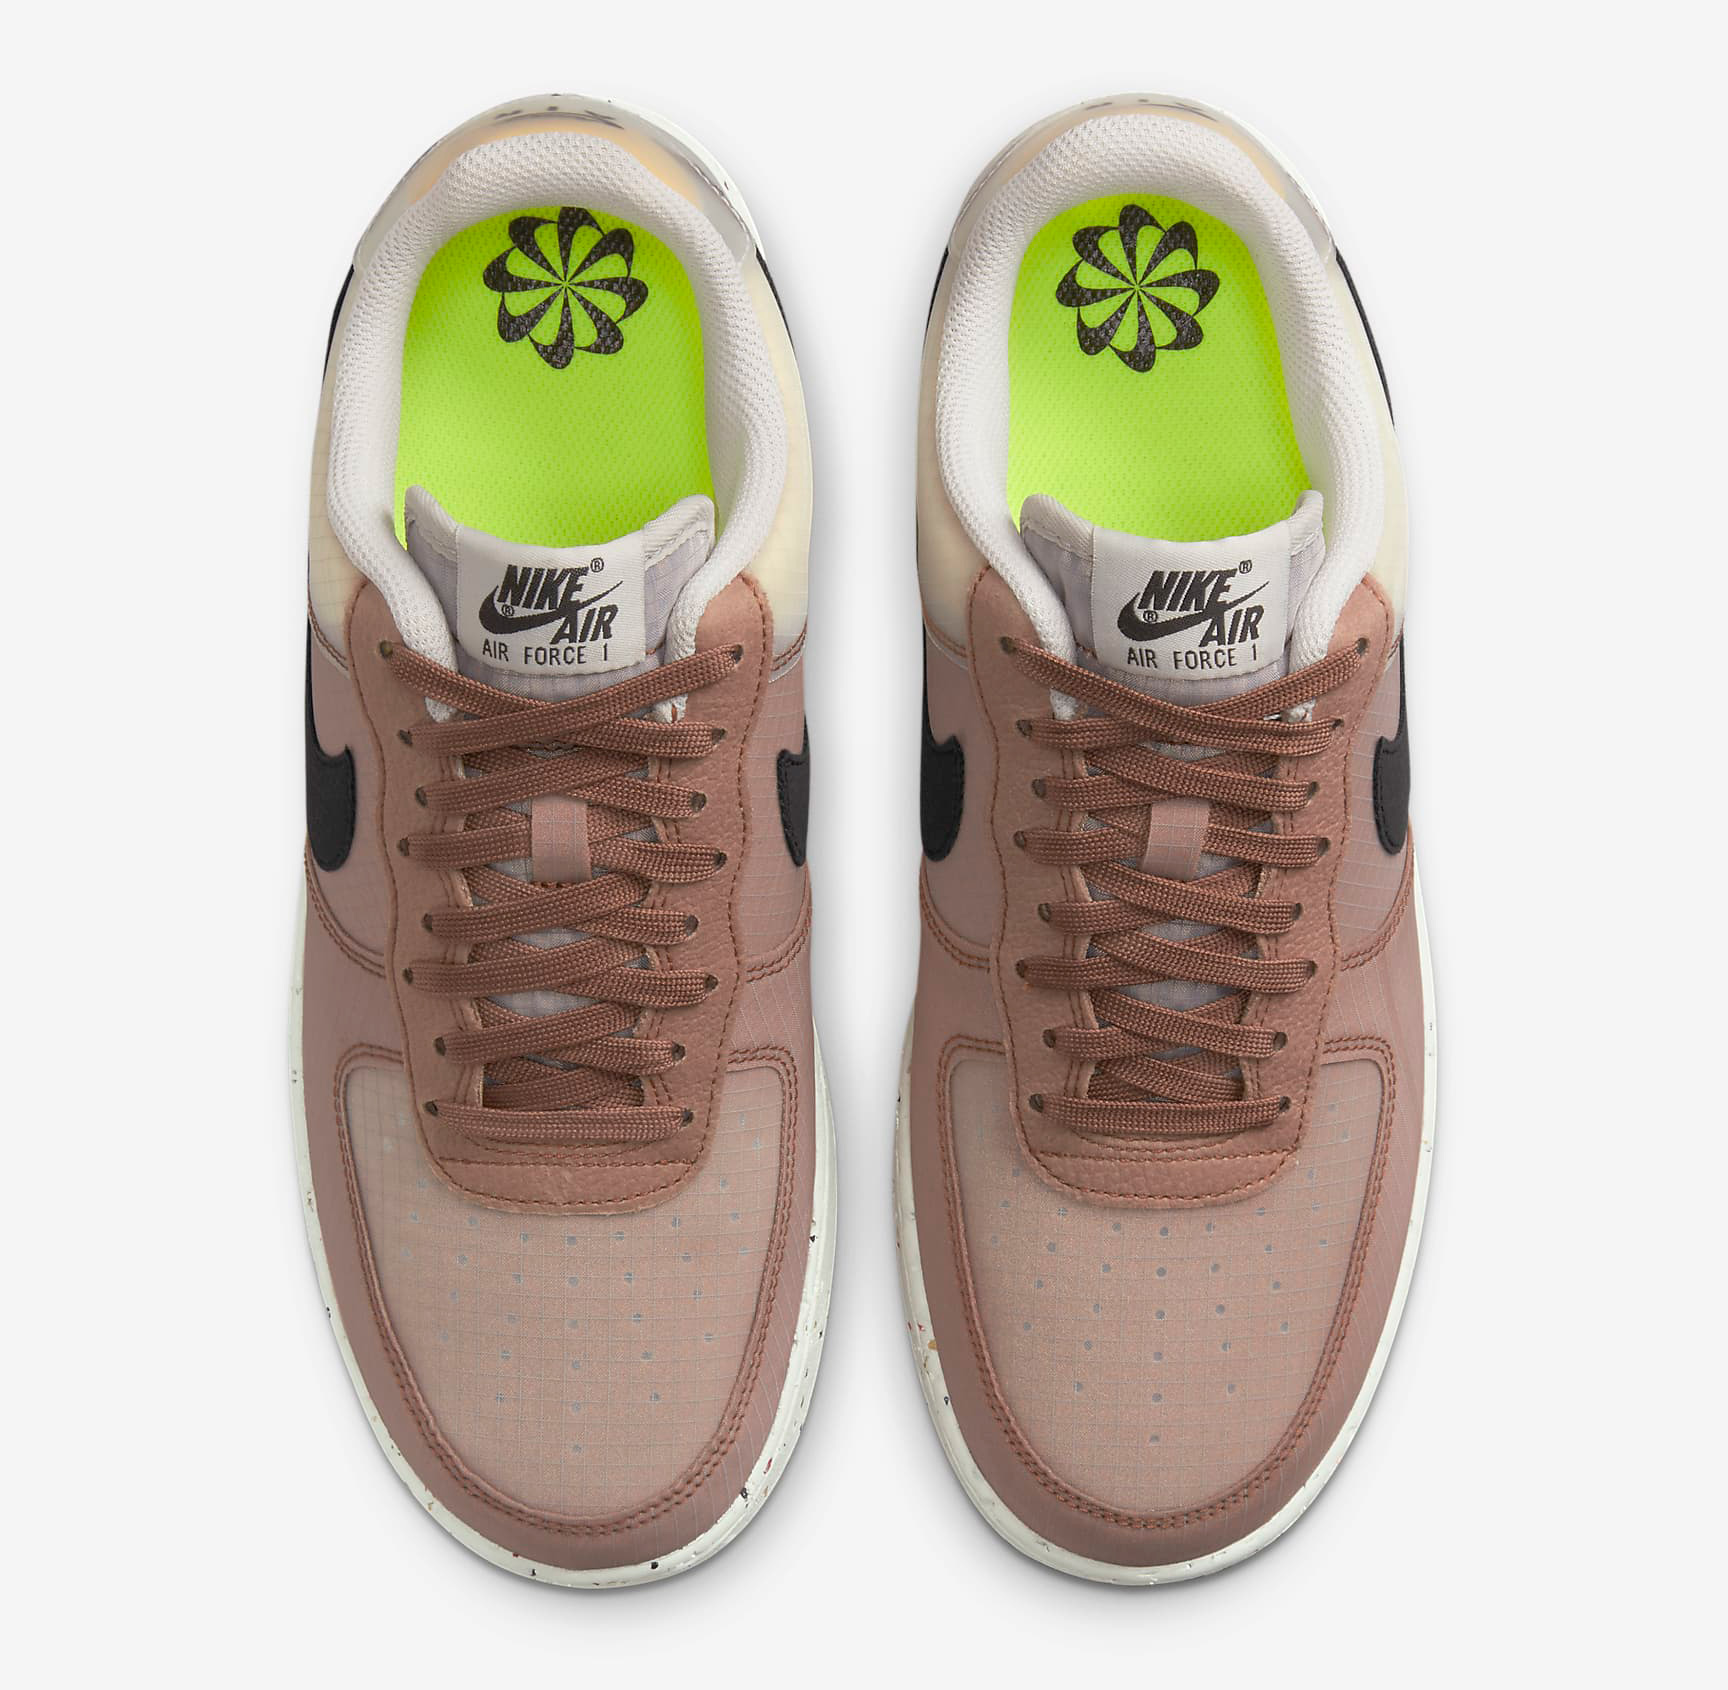 nike-air-force-1-crater-low-archaeo-brown-light-bone-volt-4